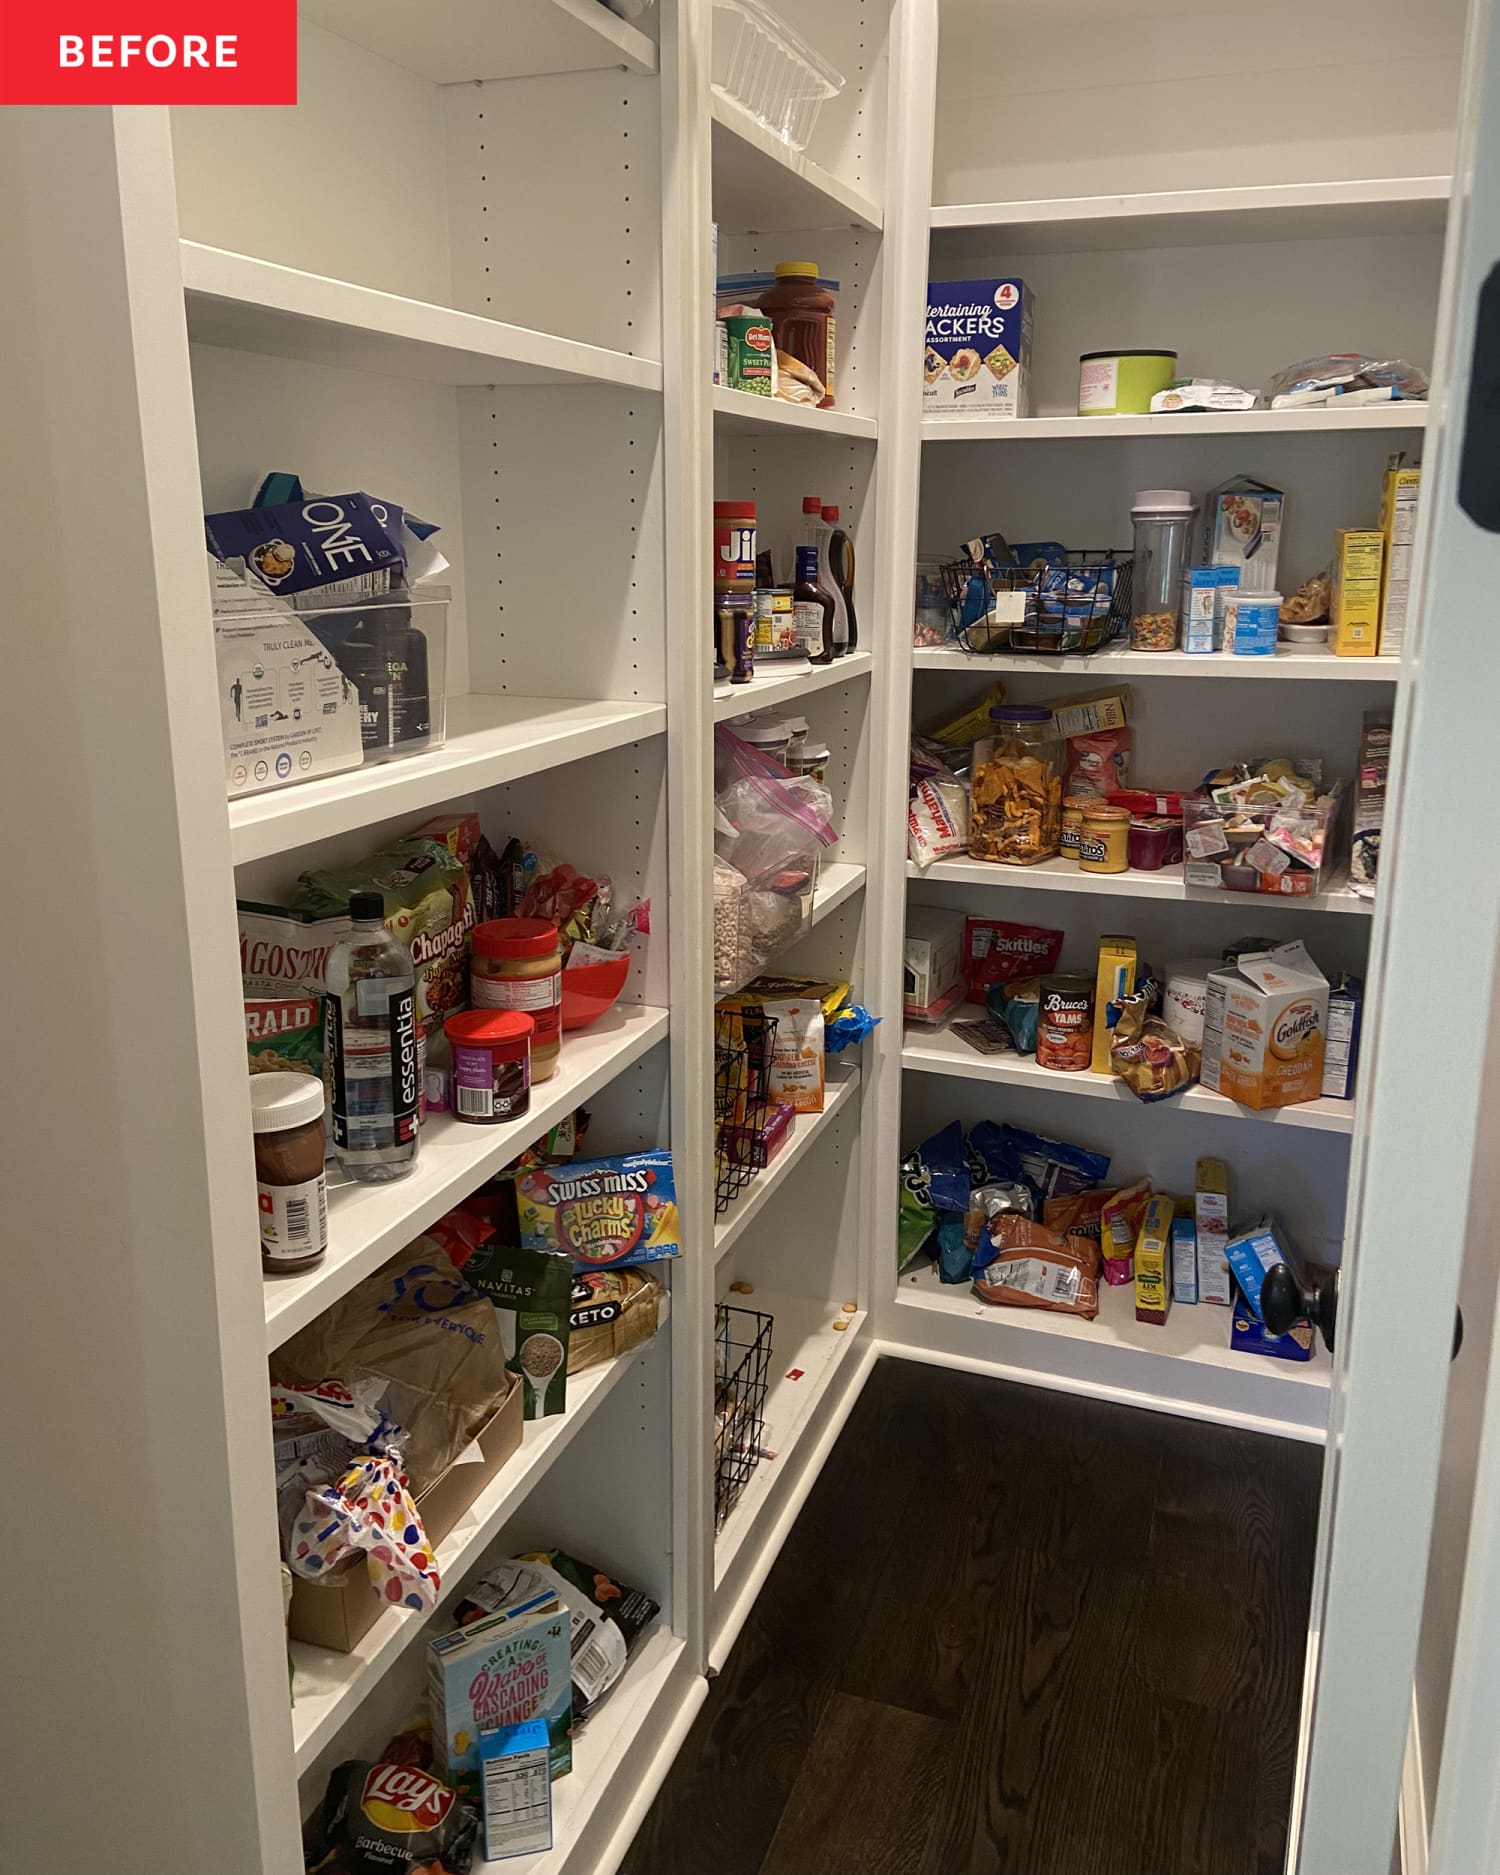 B&A: A Pro Organizer Restores This "Chaotic" Pantry